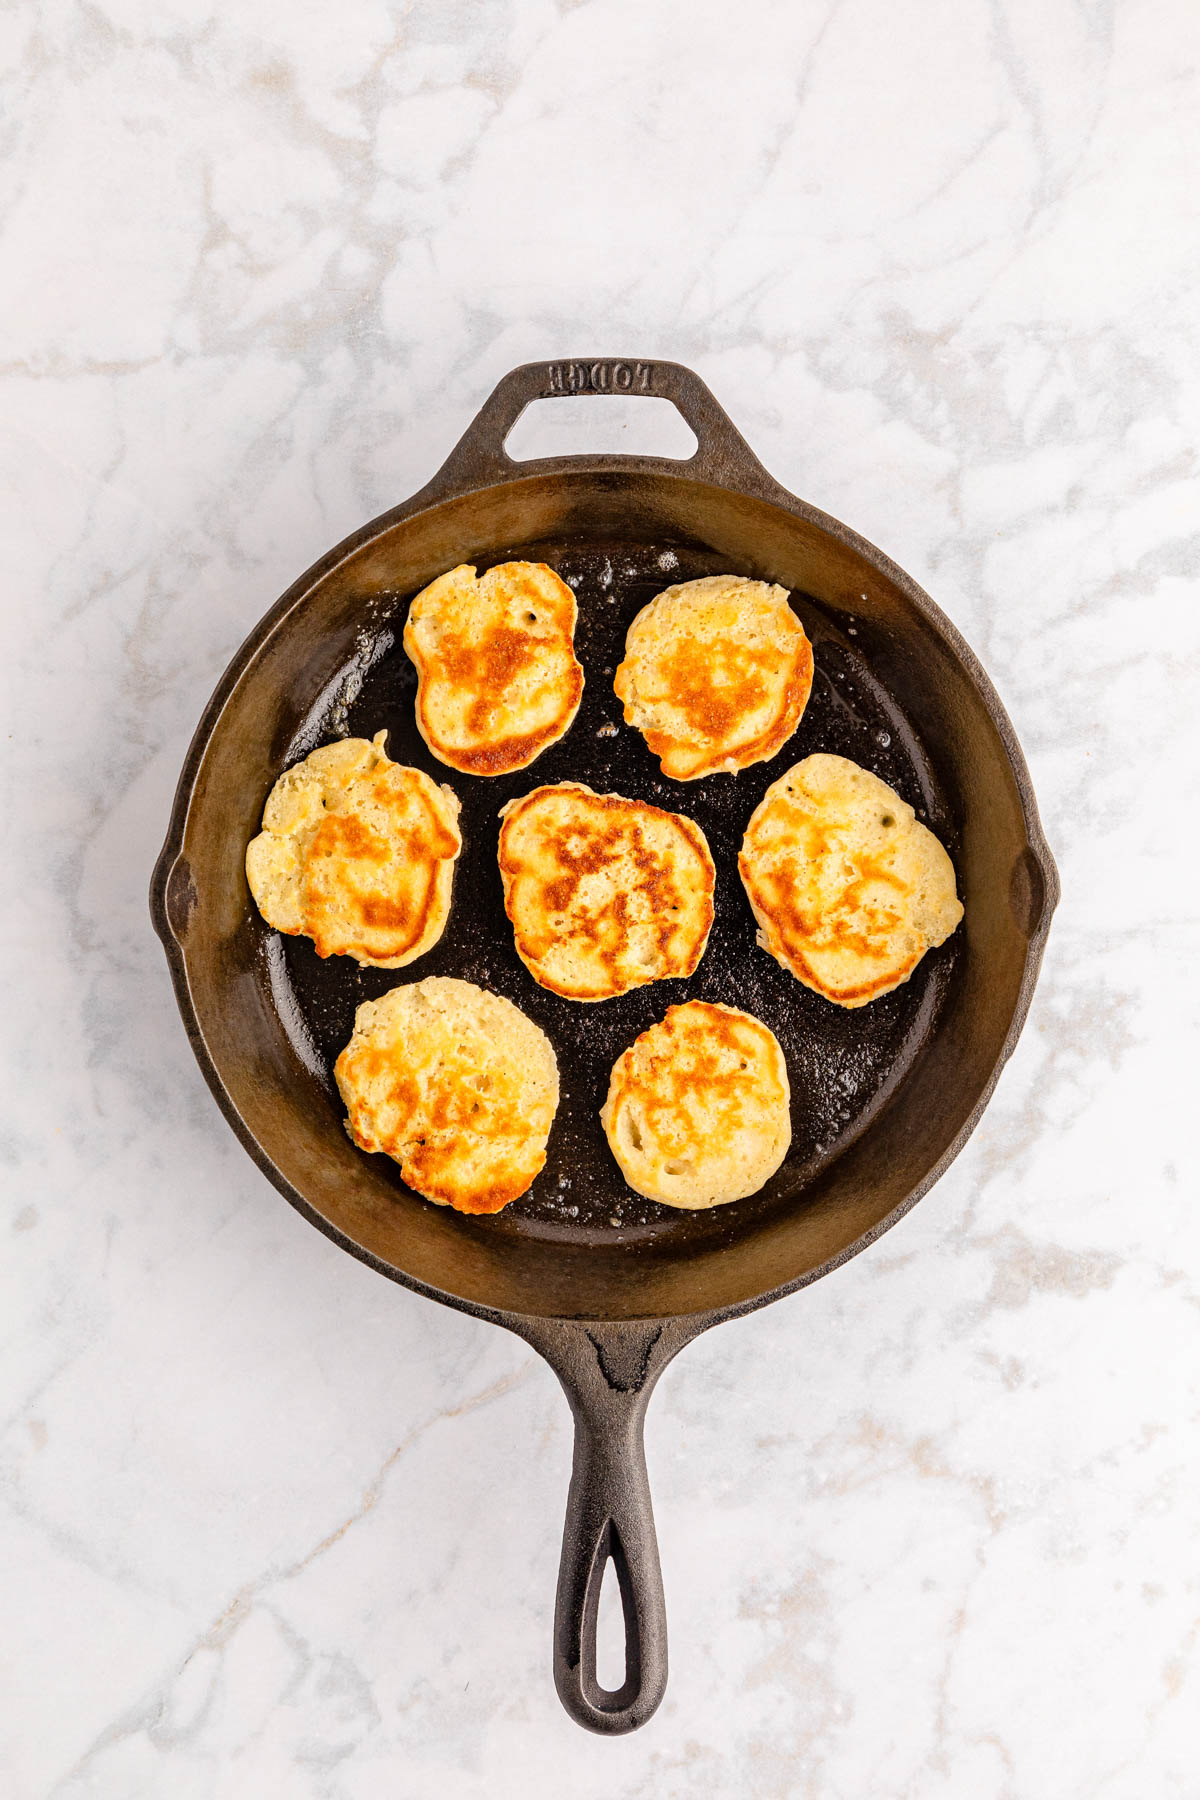 Pancakes in a cast iron skillet on a marble countertop.